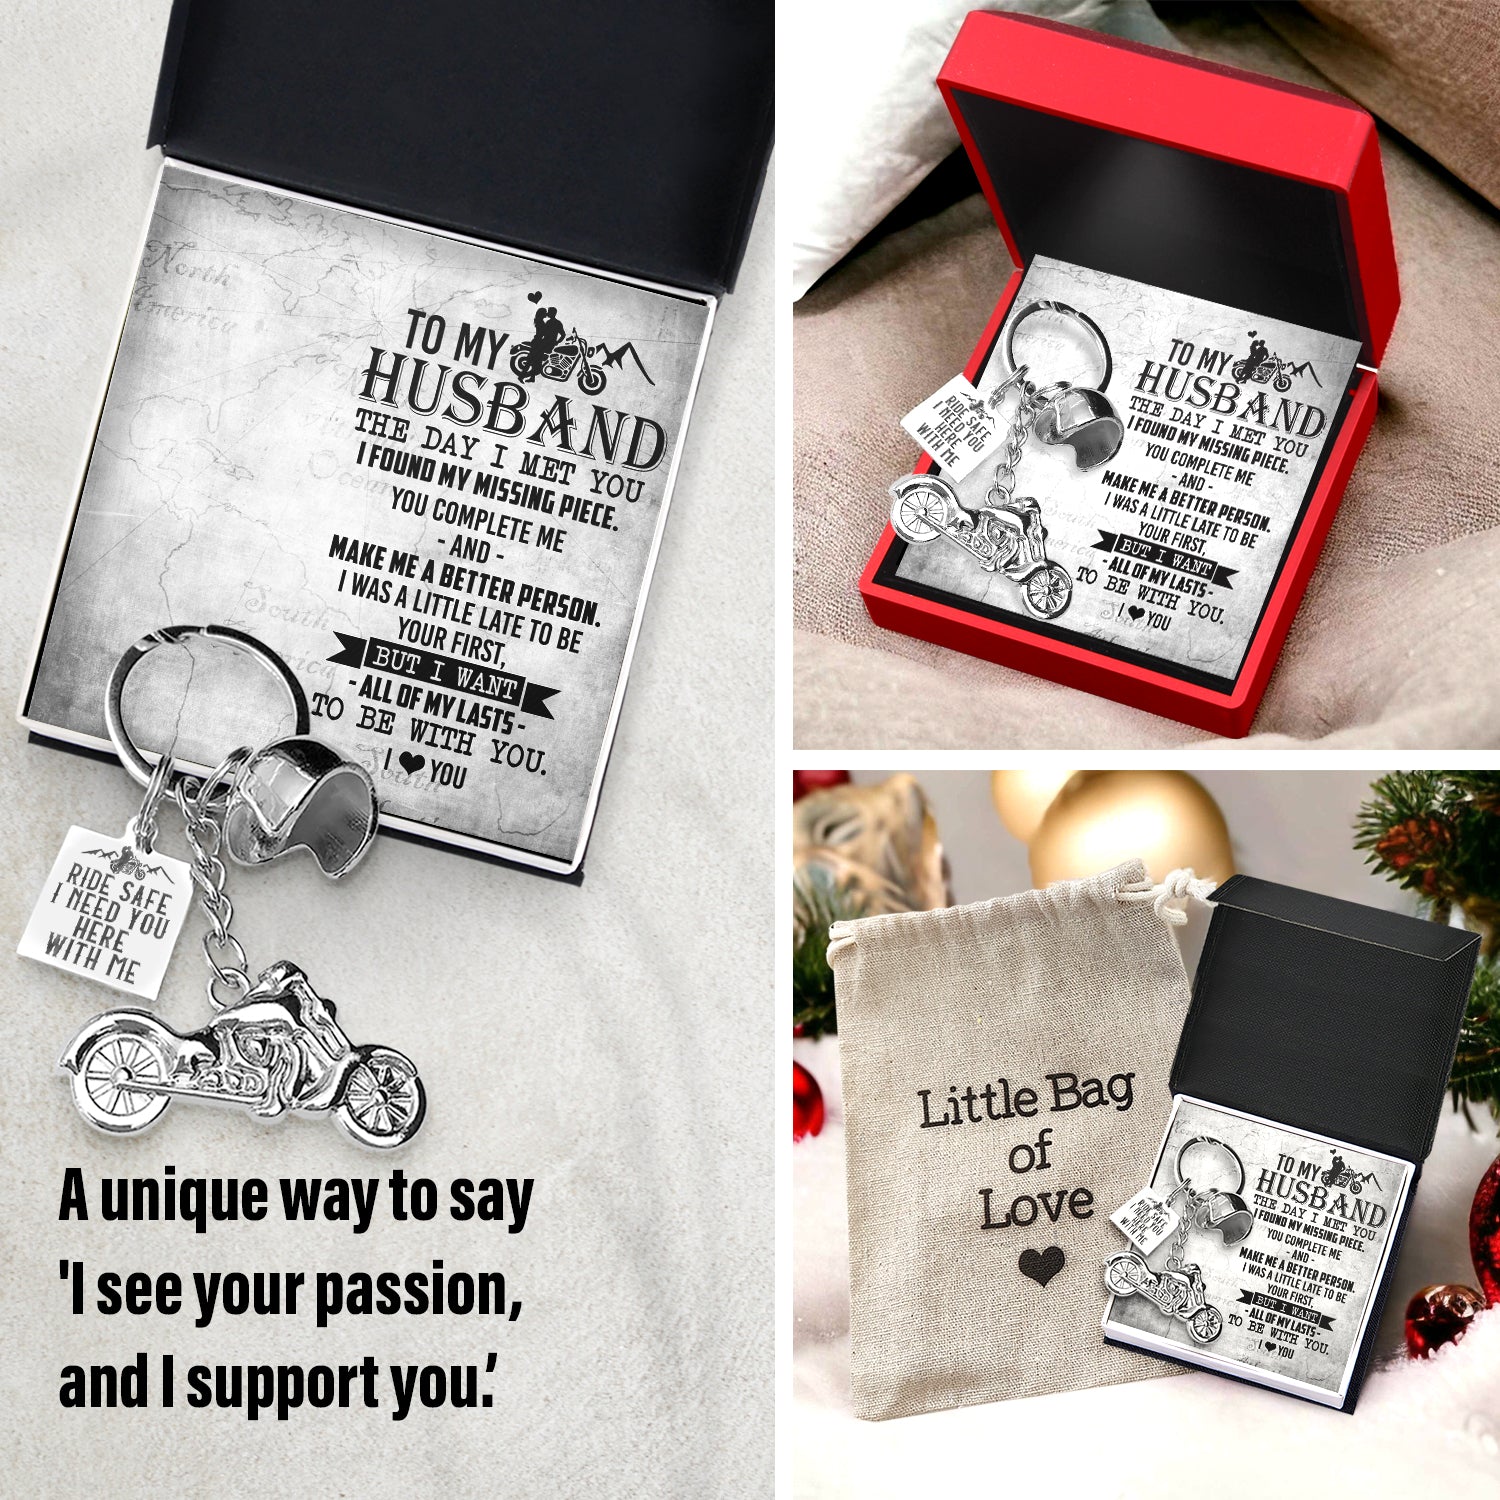 Journey With Me Always, My Beloved Husband - Custom Keychain Inspires Our Future - Gkt14010